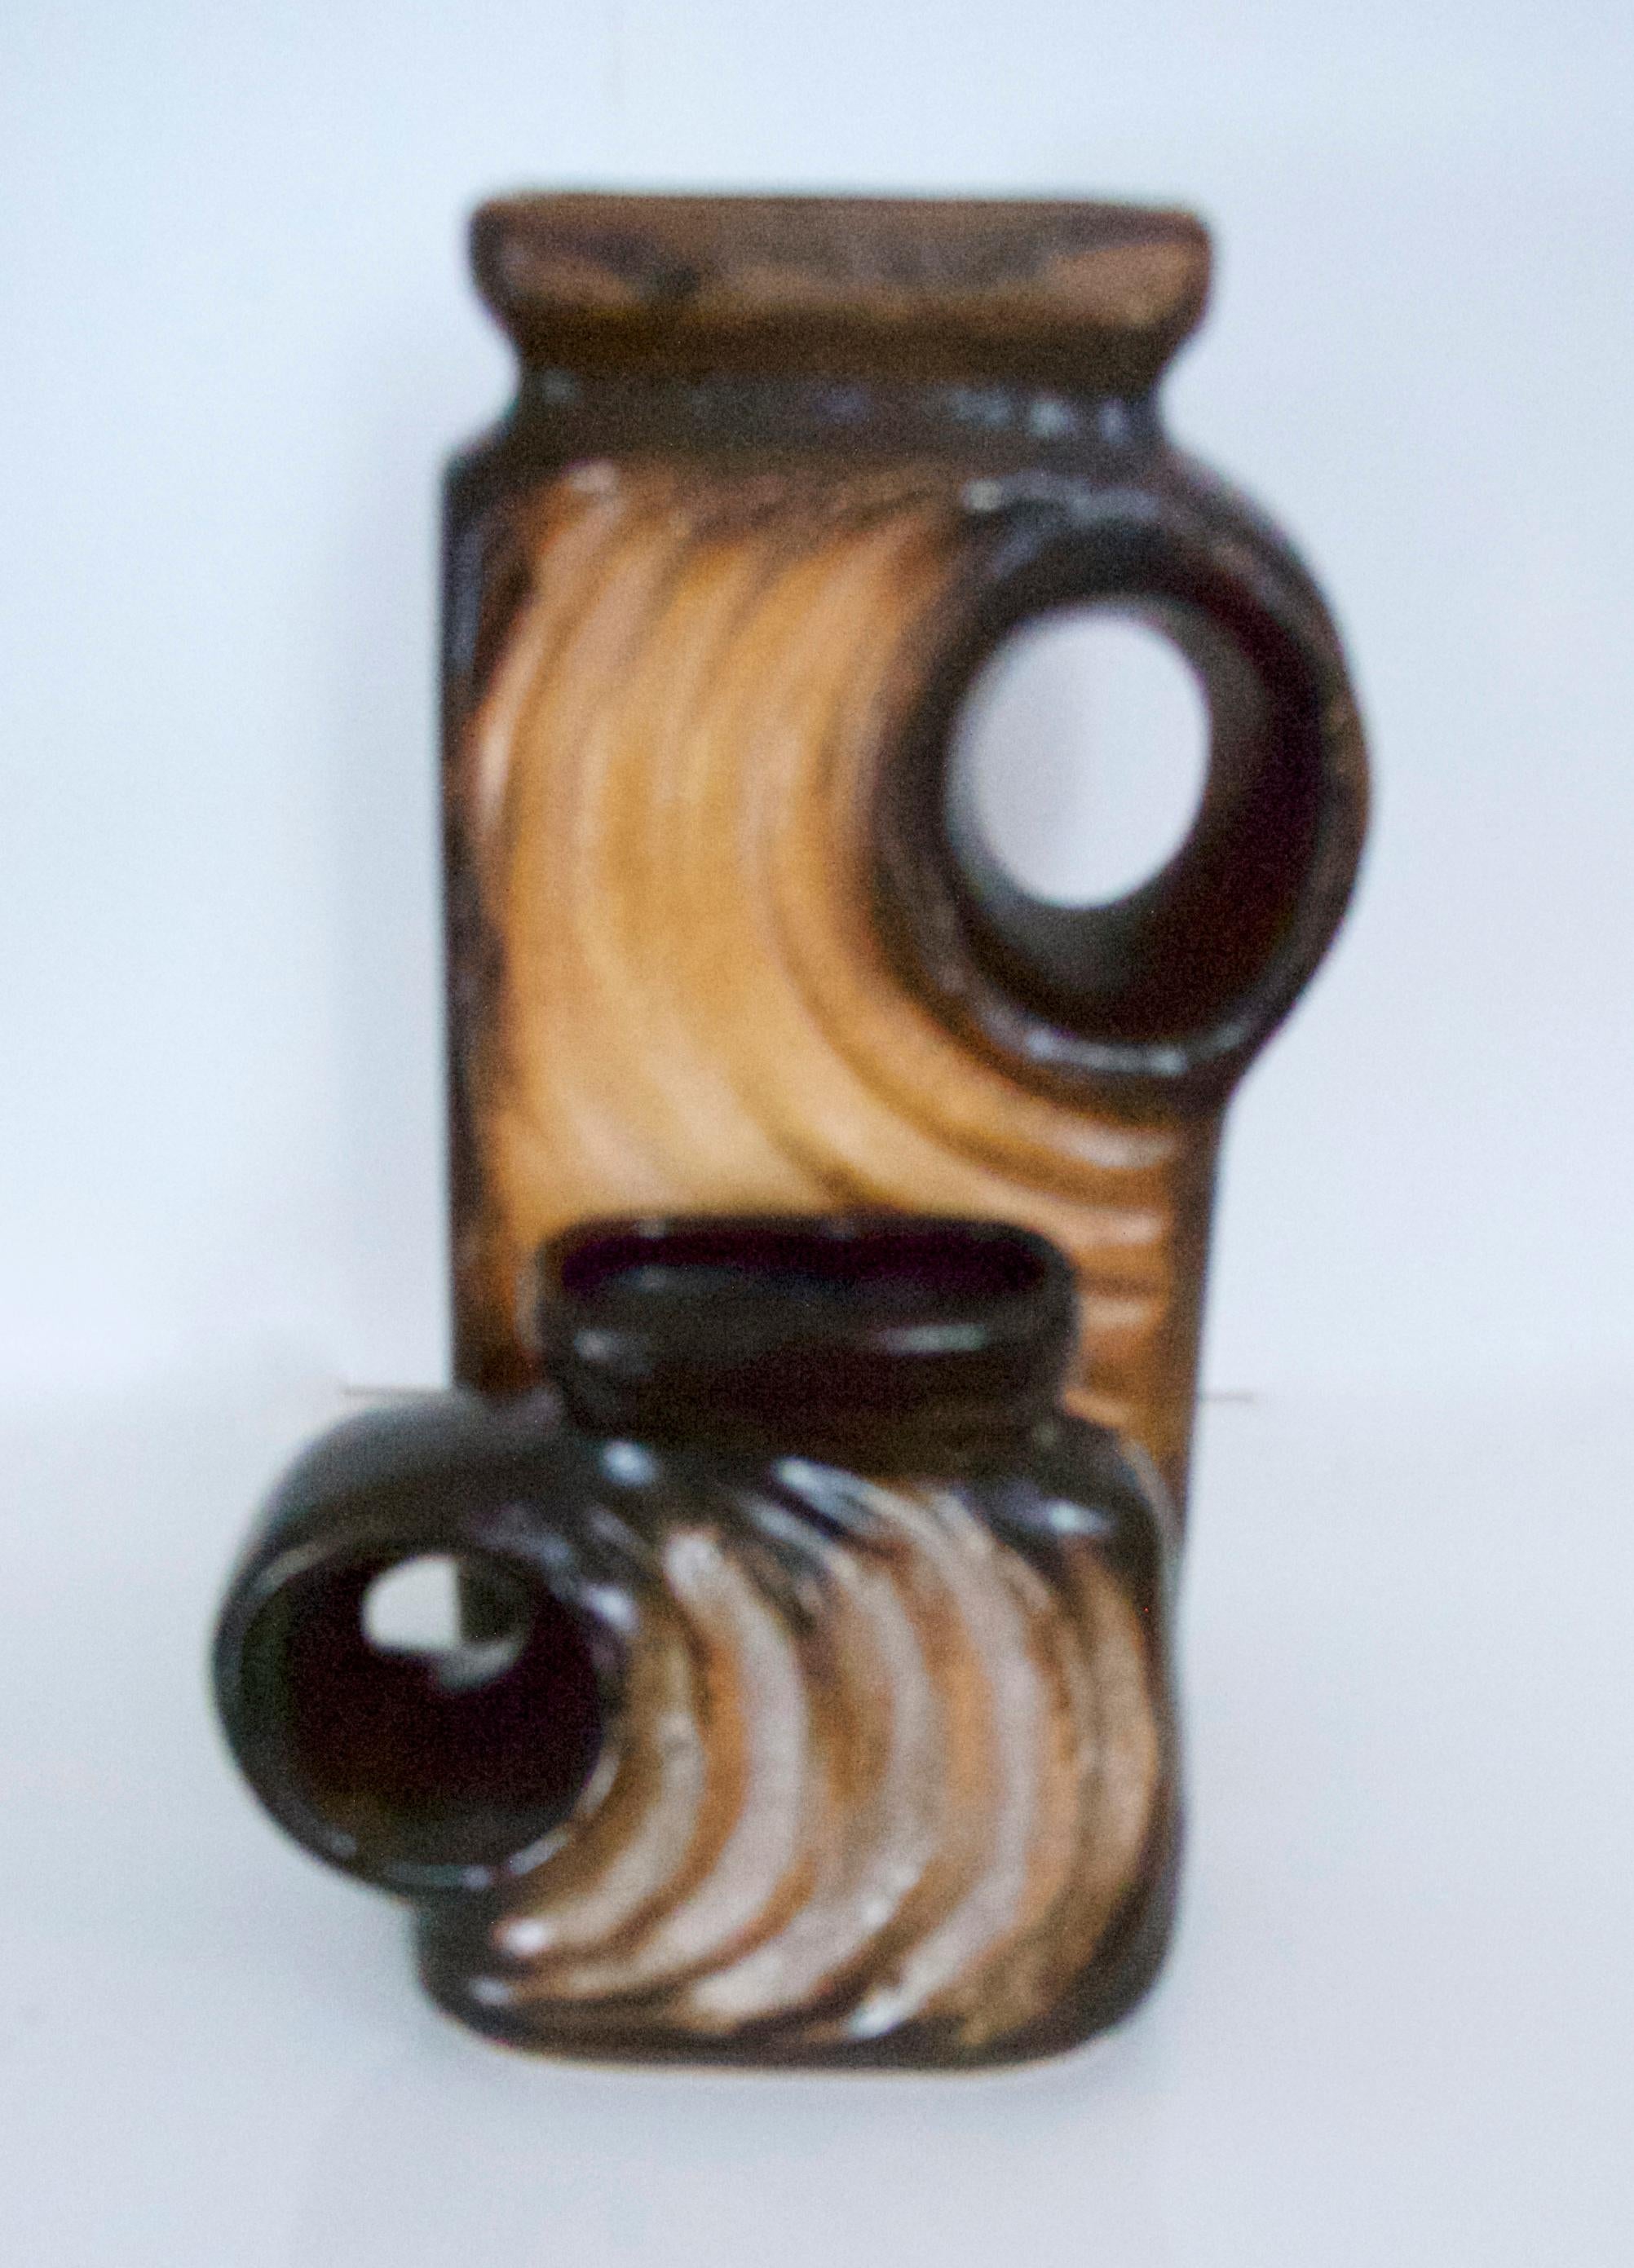 Italian Brutalist Space Age Ceramic Chimney Vases Walter Becht Late 1960s Germany, Pair For Sale